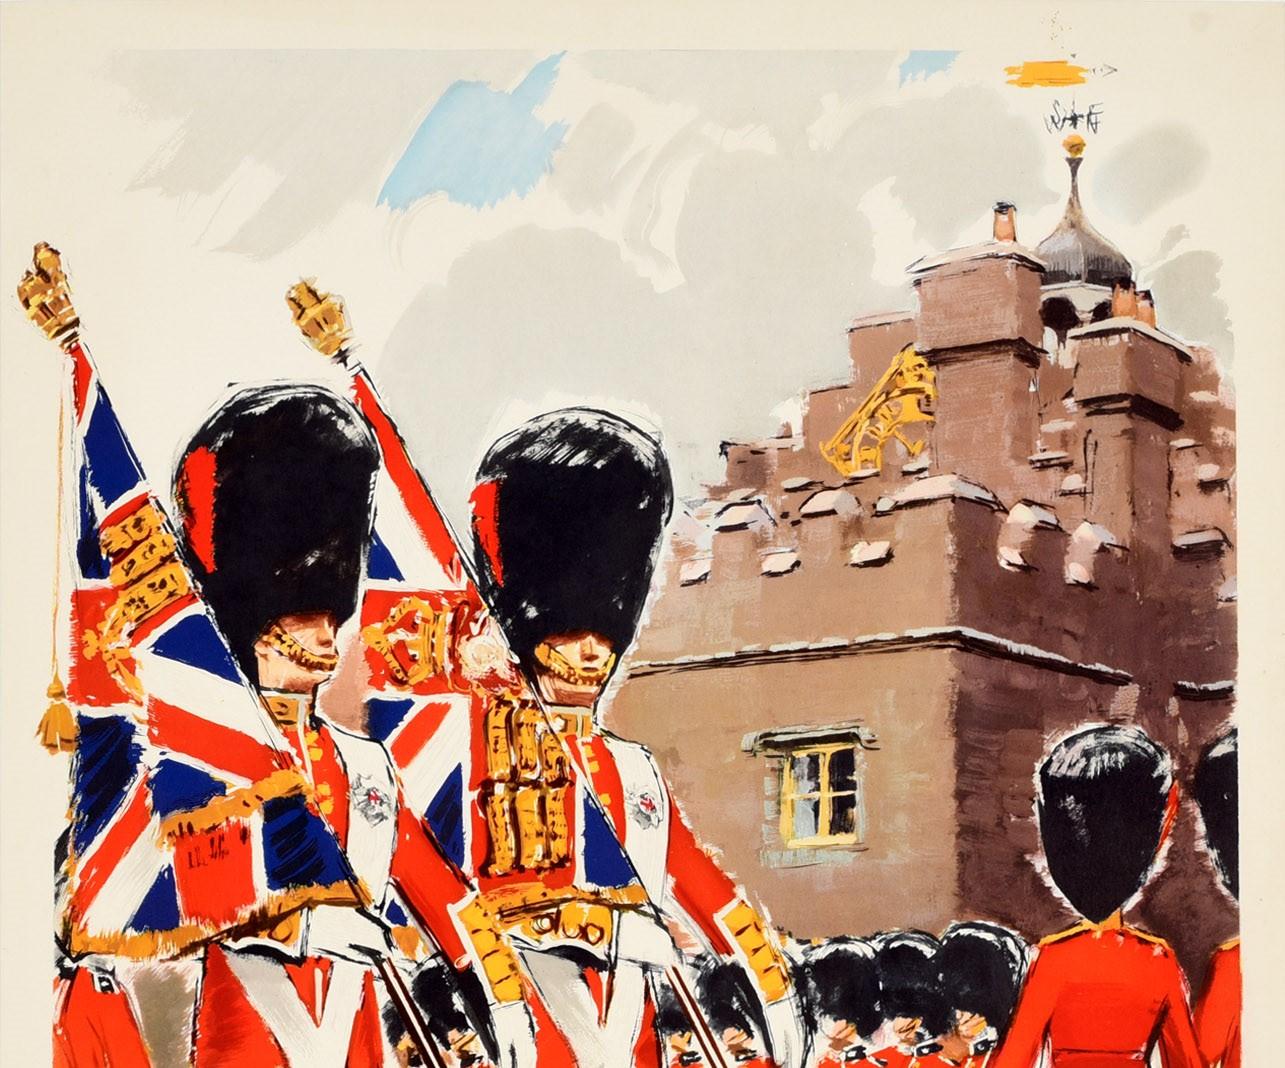 Original vintage travel poster promoting Britain as a tourist destination - Ceremonial in Britain - published by the British Travel And Holidays Association featuring a colourful illustration of Royal Coldstream Guards in ceremonial dress and